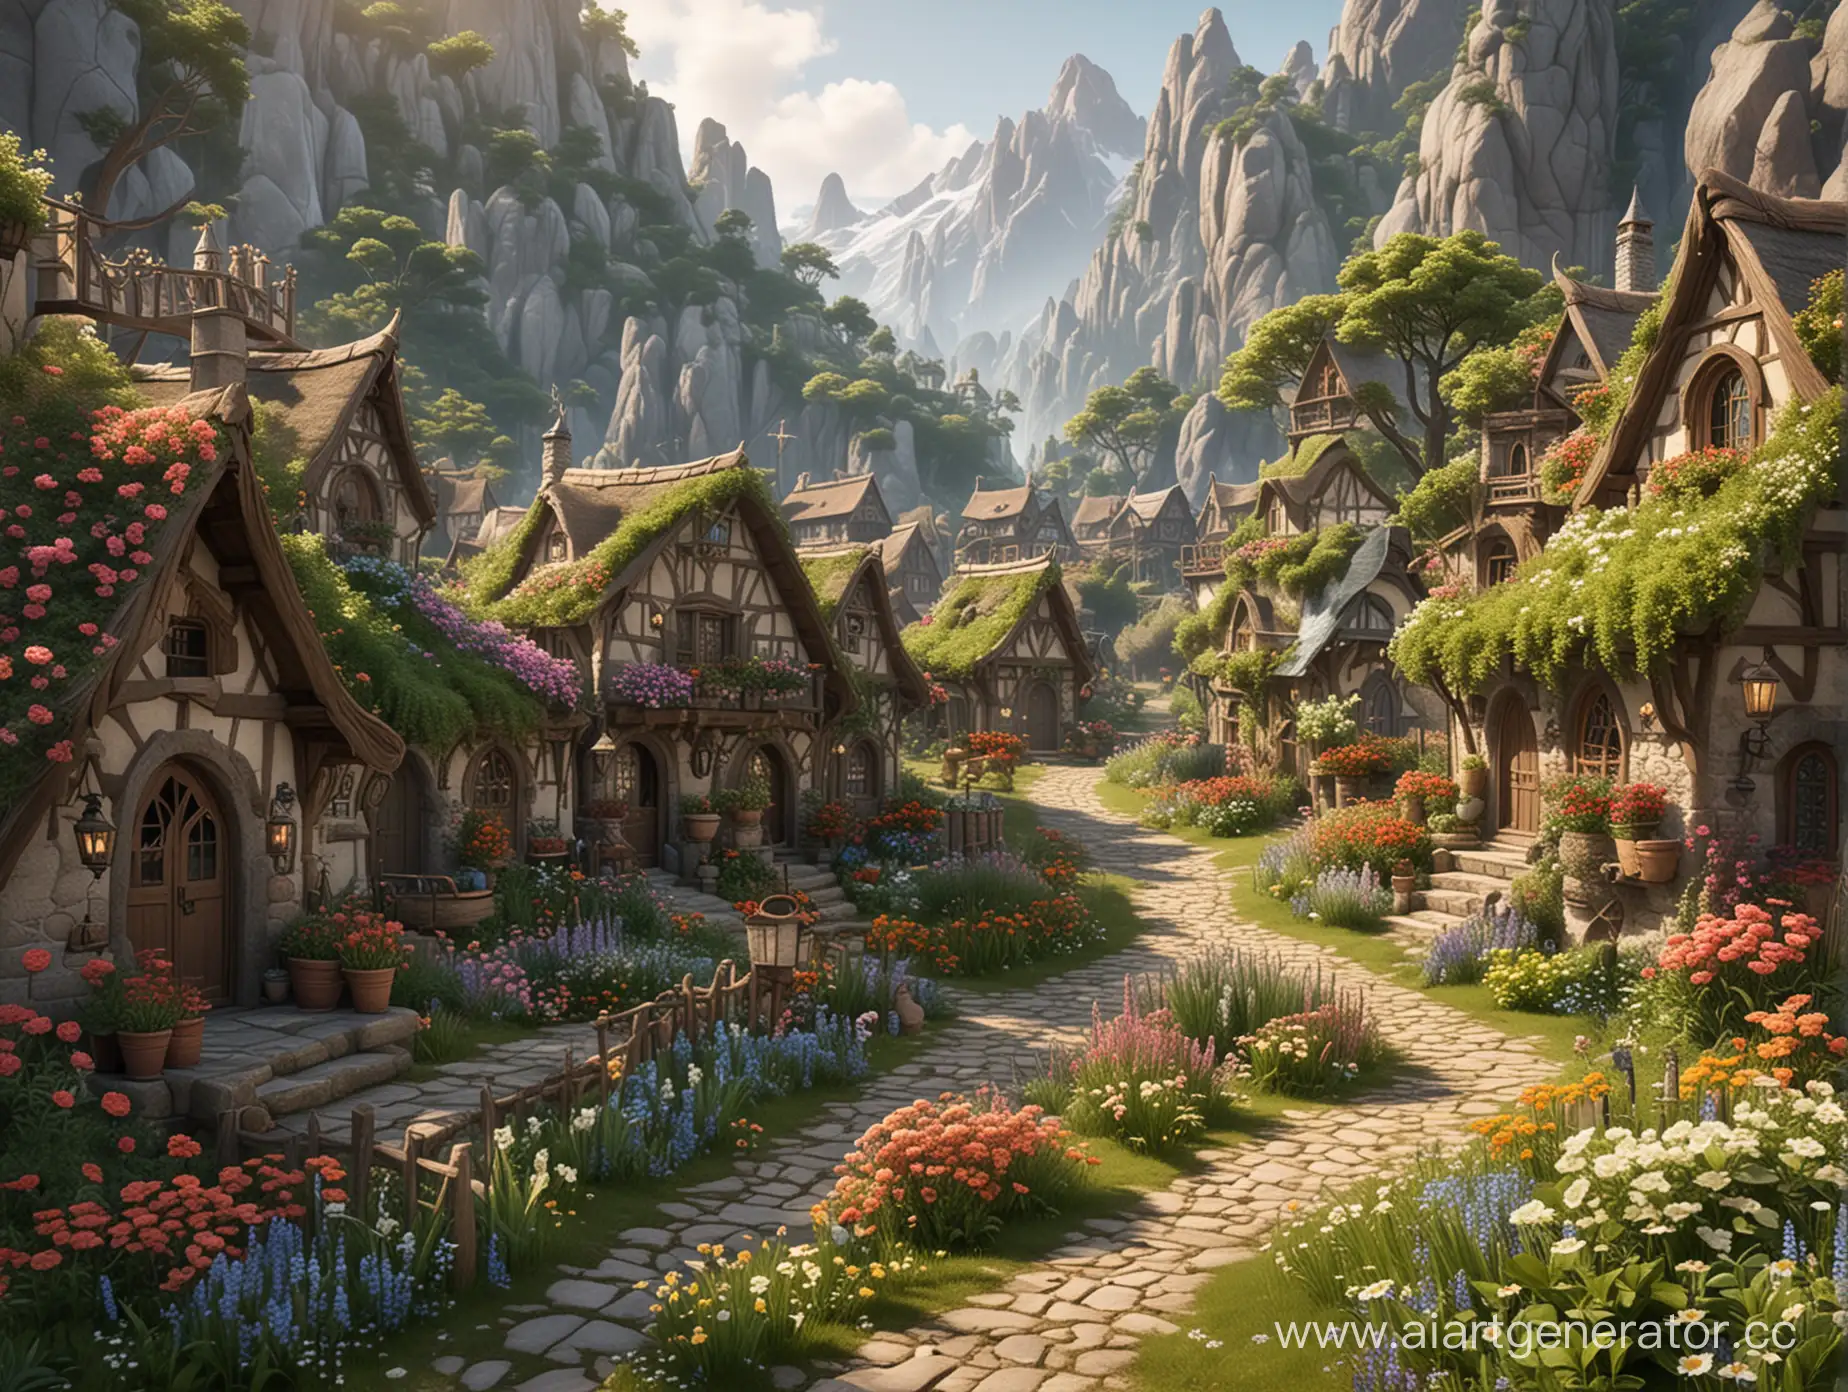 Enchanting-Elven-Village-Surrounded-by-Lush-Greenery-and-Blooming-Flowers